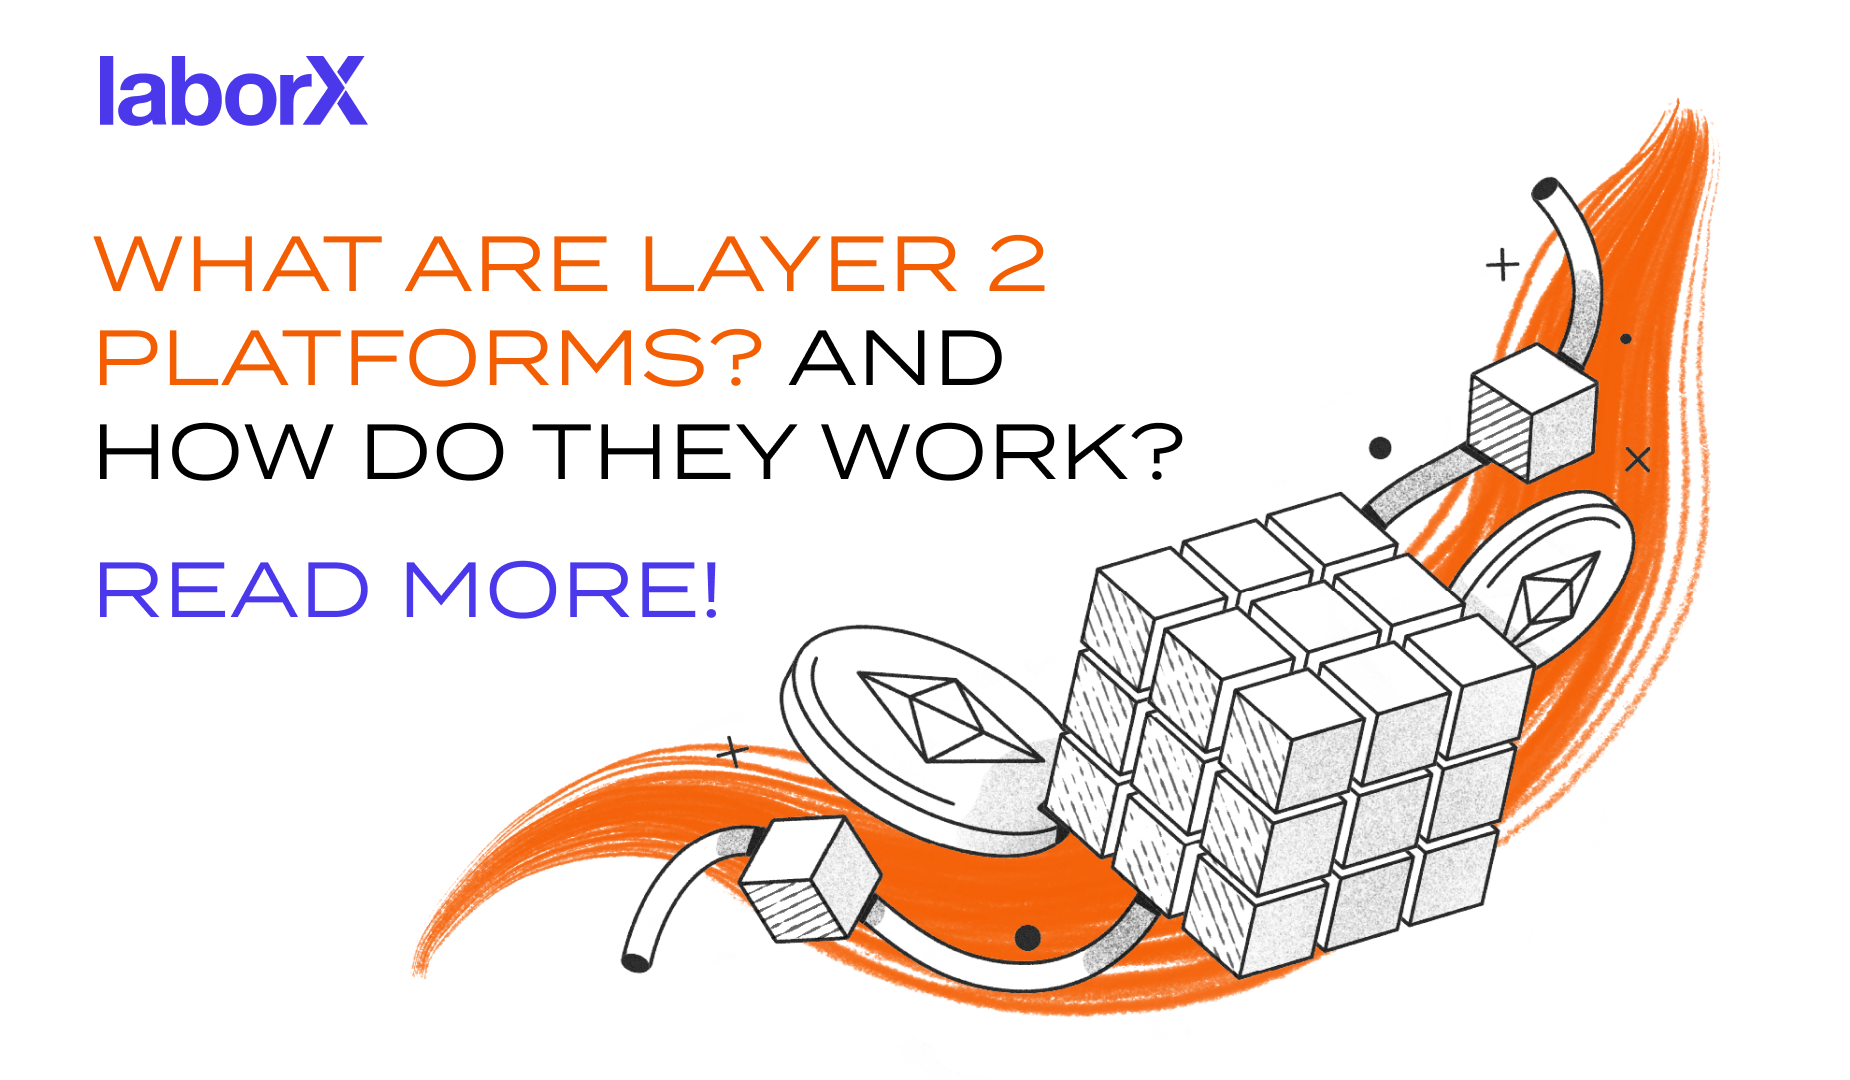 What Are Layer 2 Platforms? And How Do They Work?